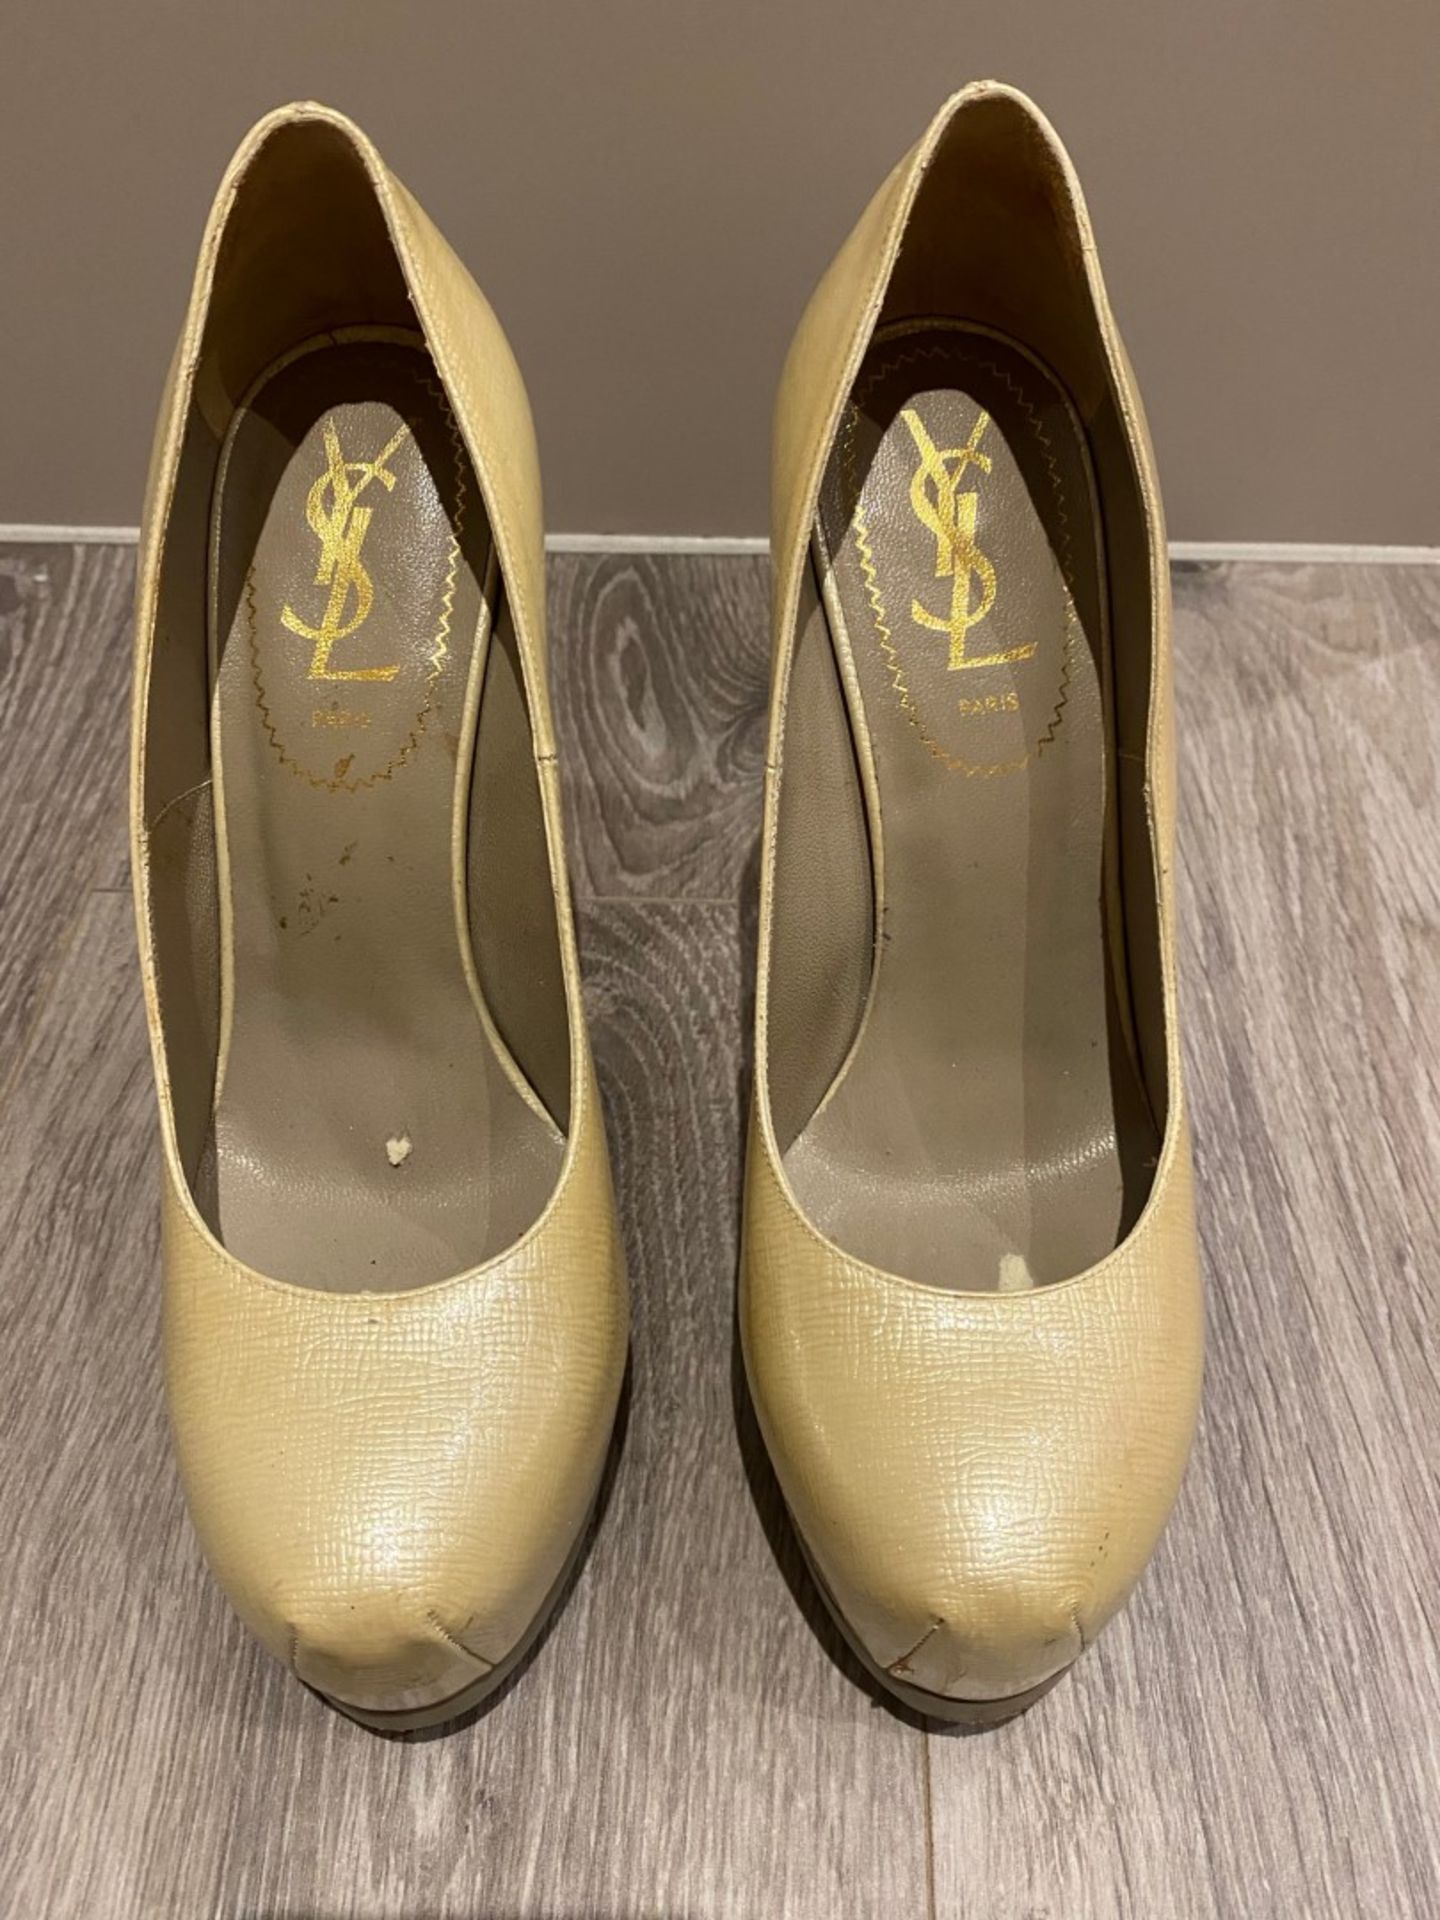 1 x Pair Of Genuine YSL High Heel Shoes In Champagne - Size: 36 - Preowned in Worn Condition - Ref: - Image 4 of 5